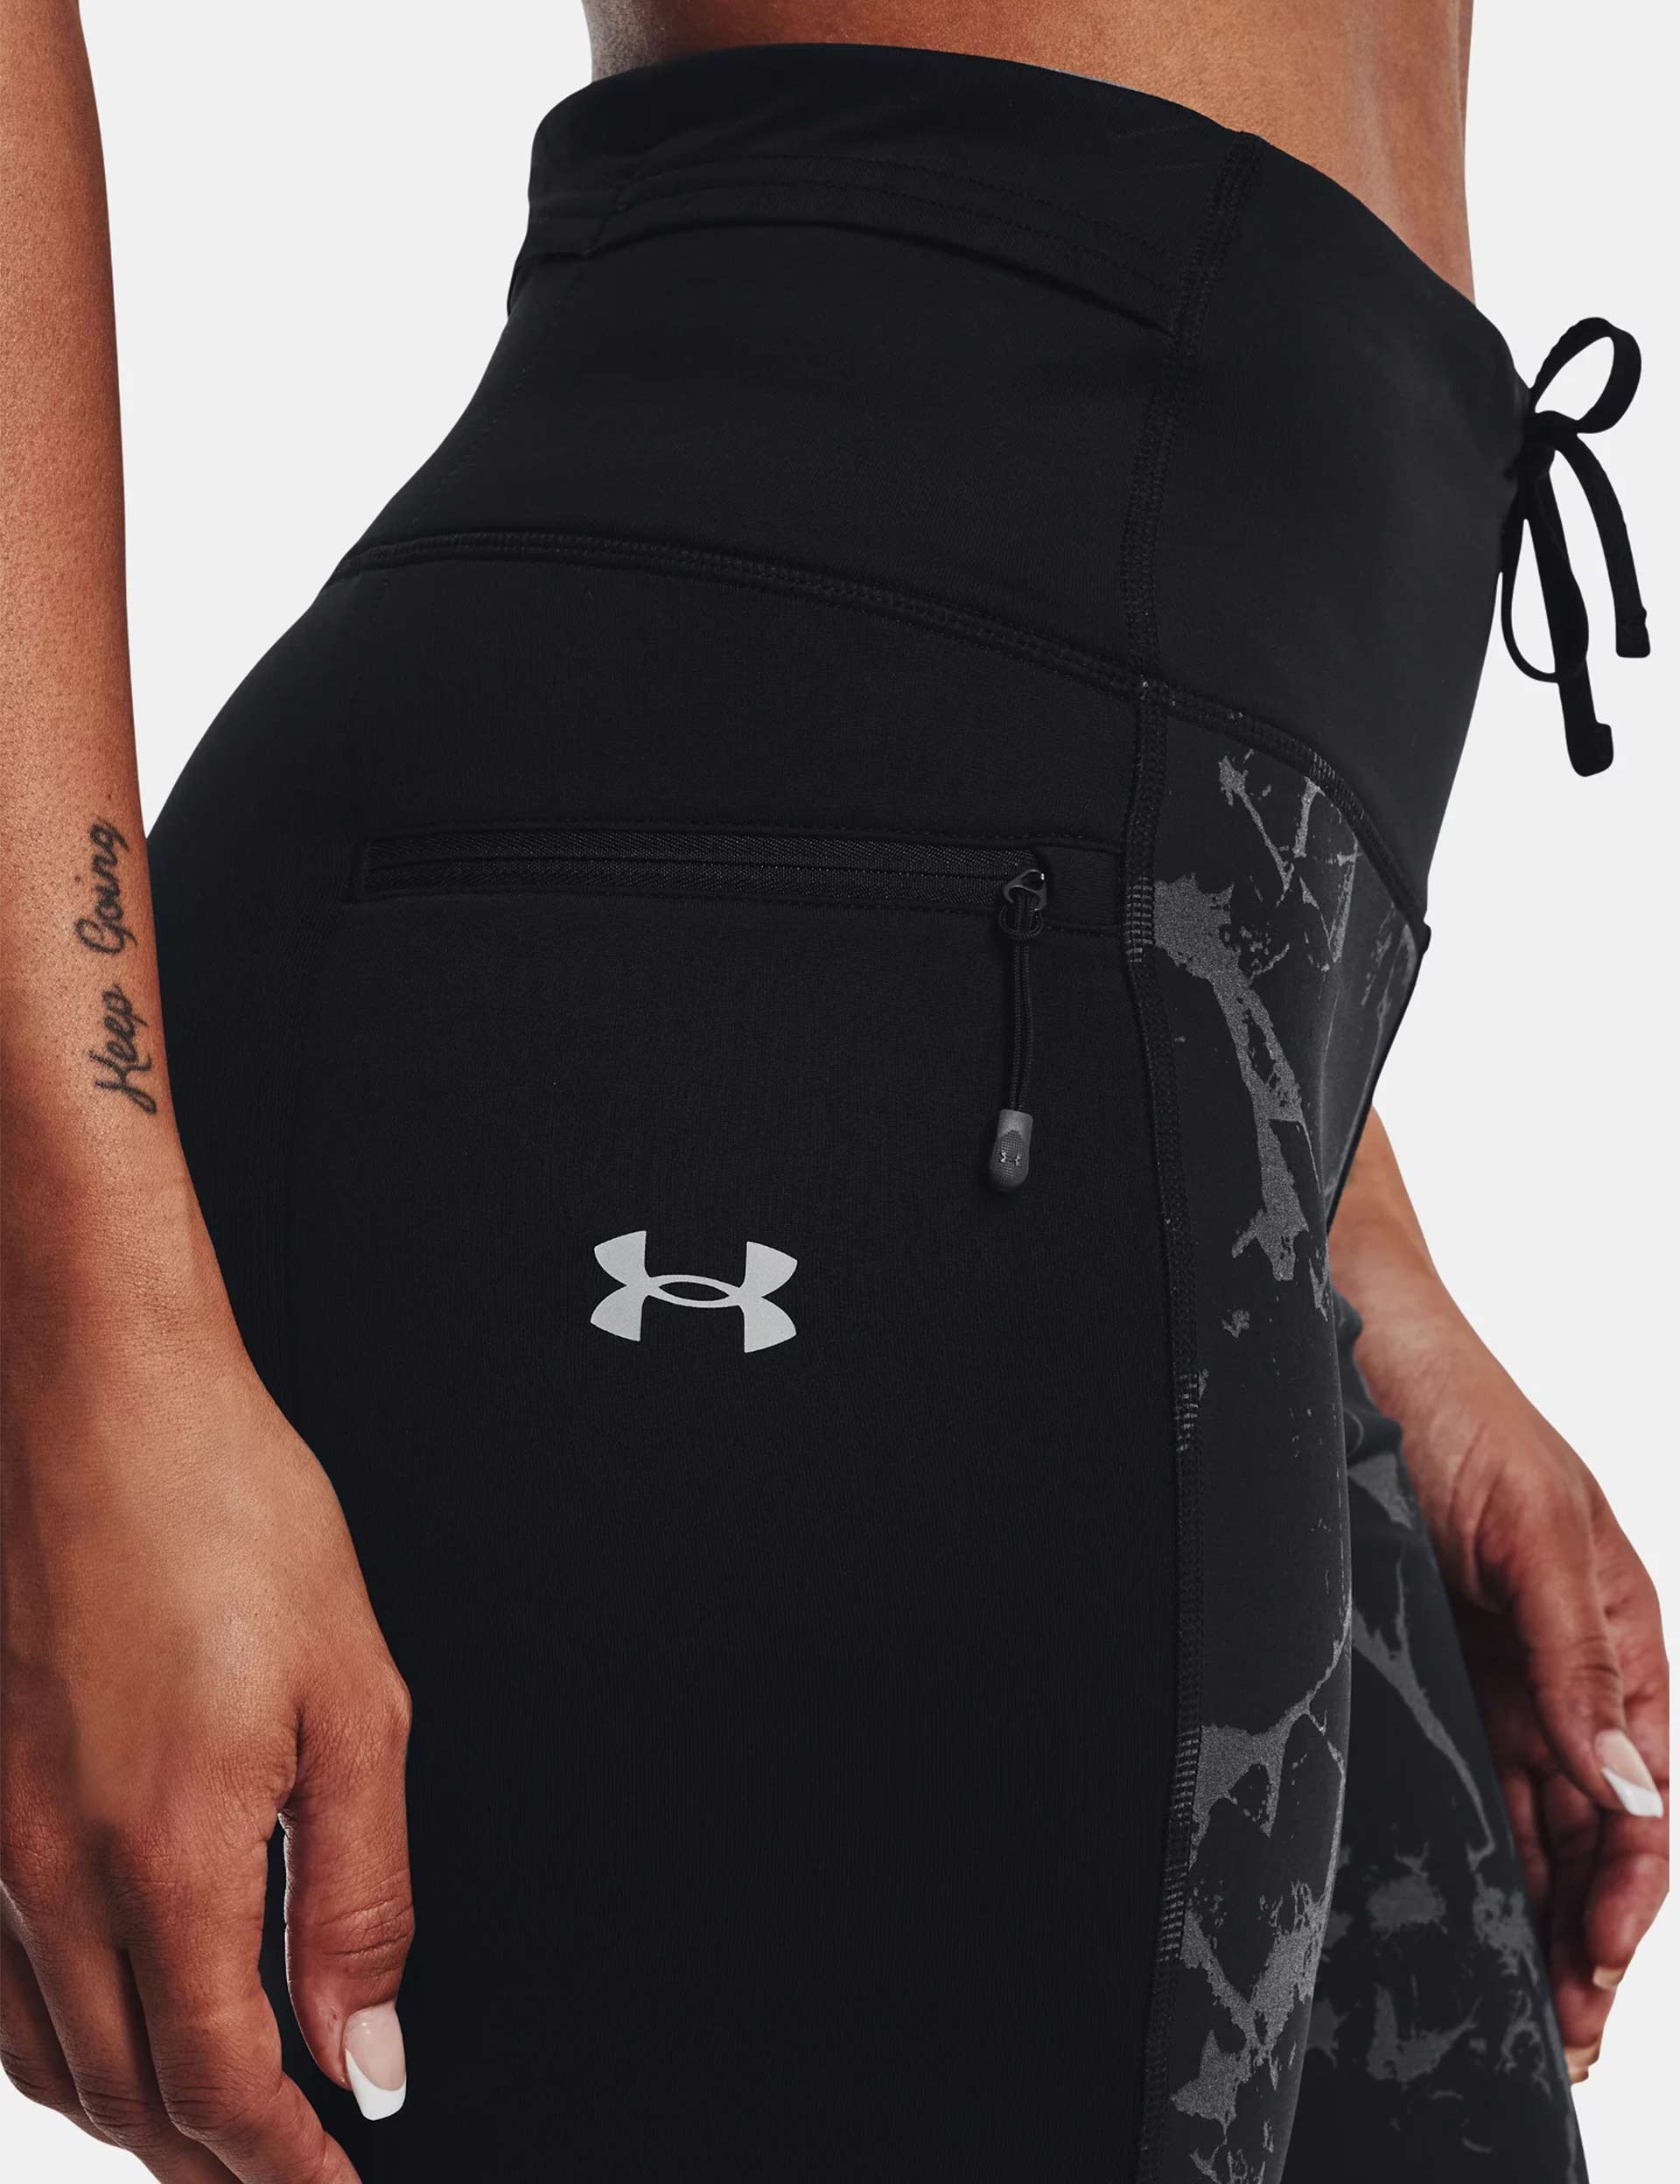 Under Armour OutRun The Cold Tights - Black/Reflectiveimage4- The Sports Edit